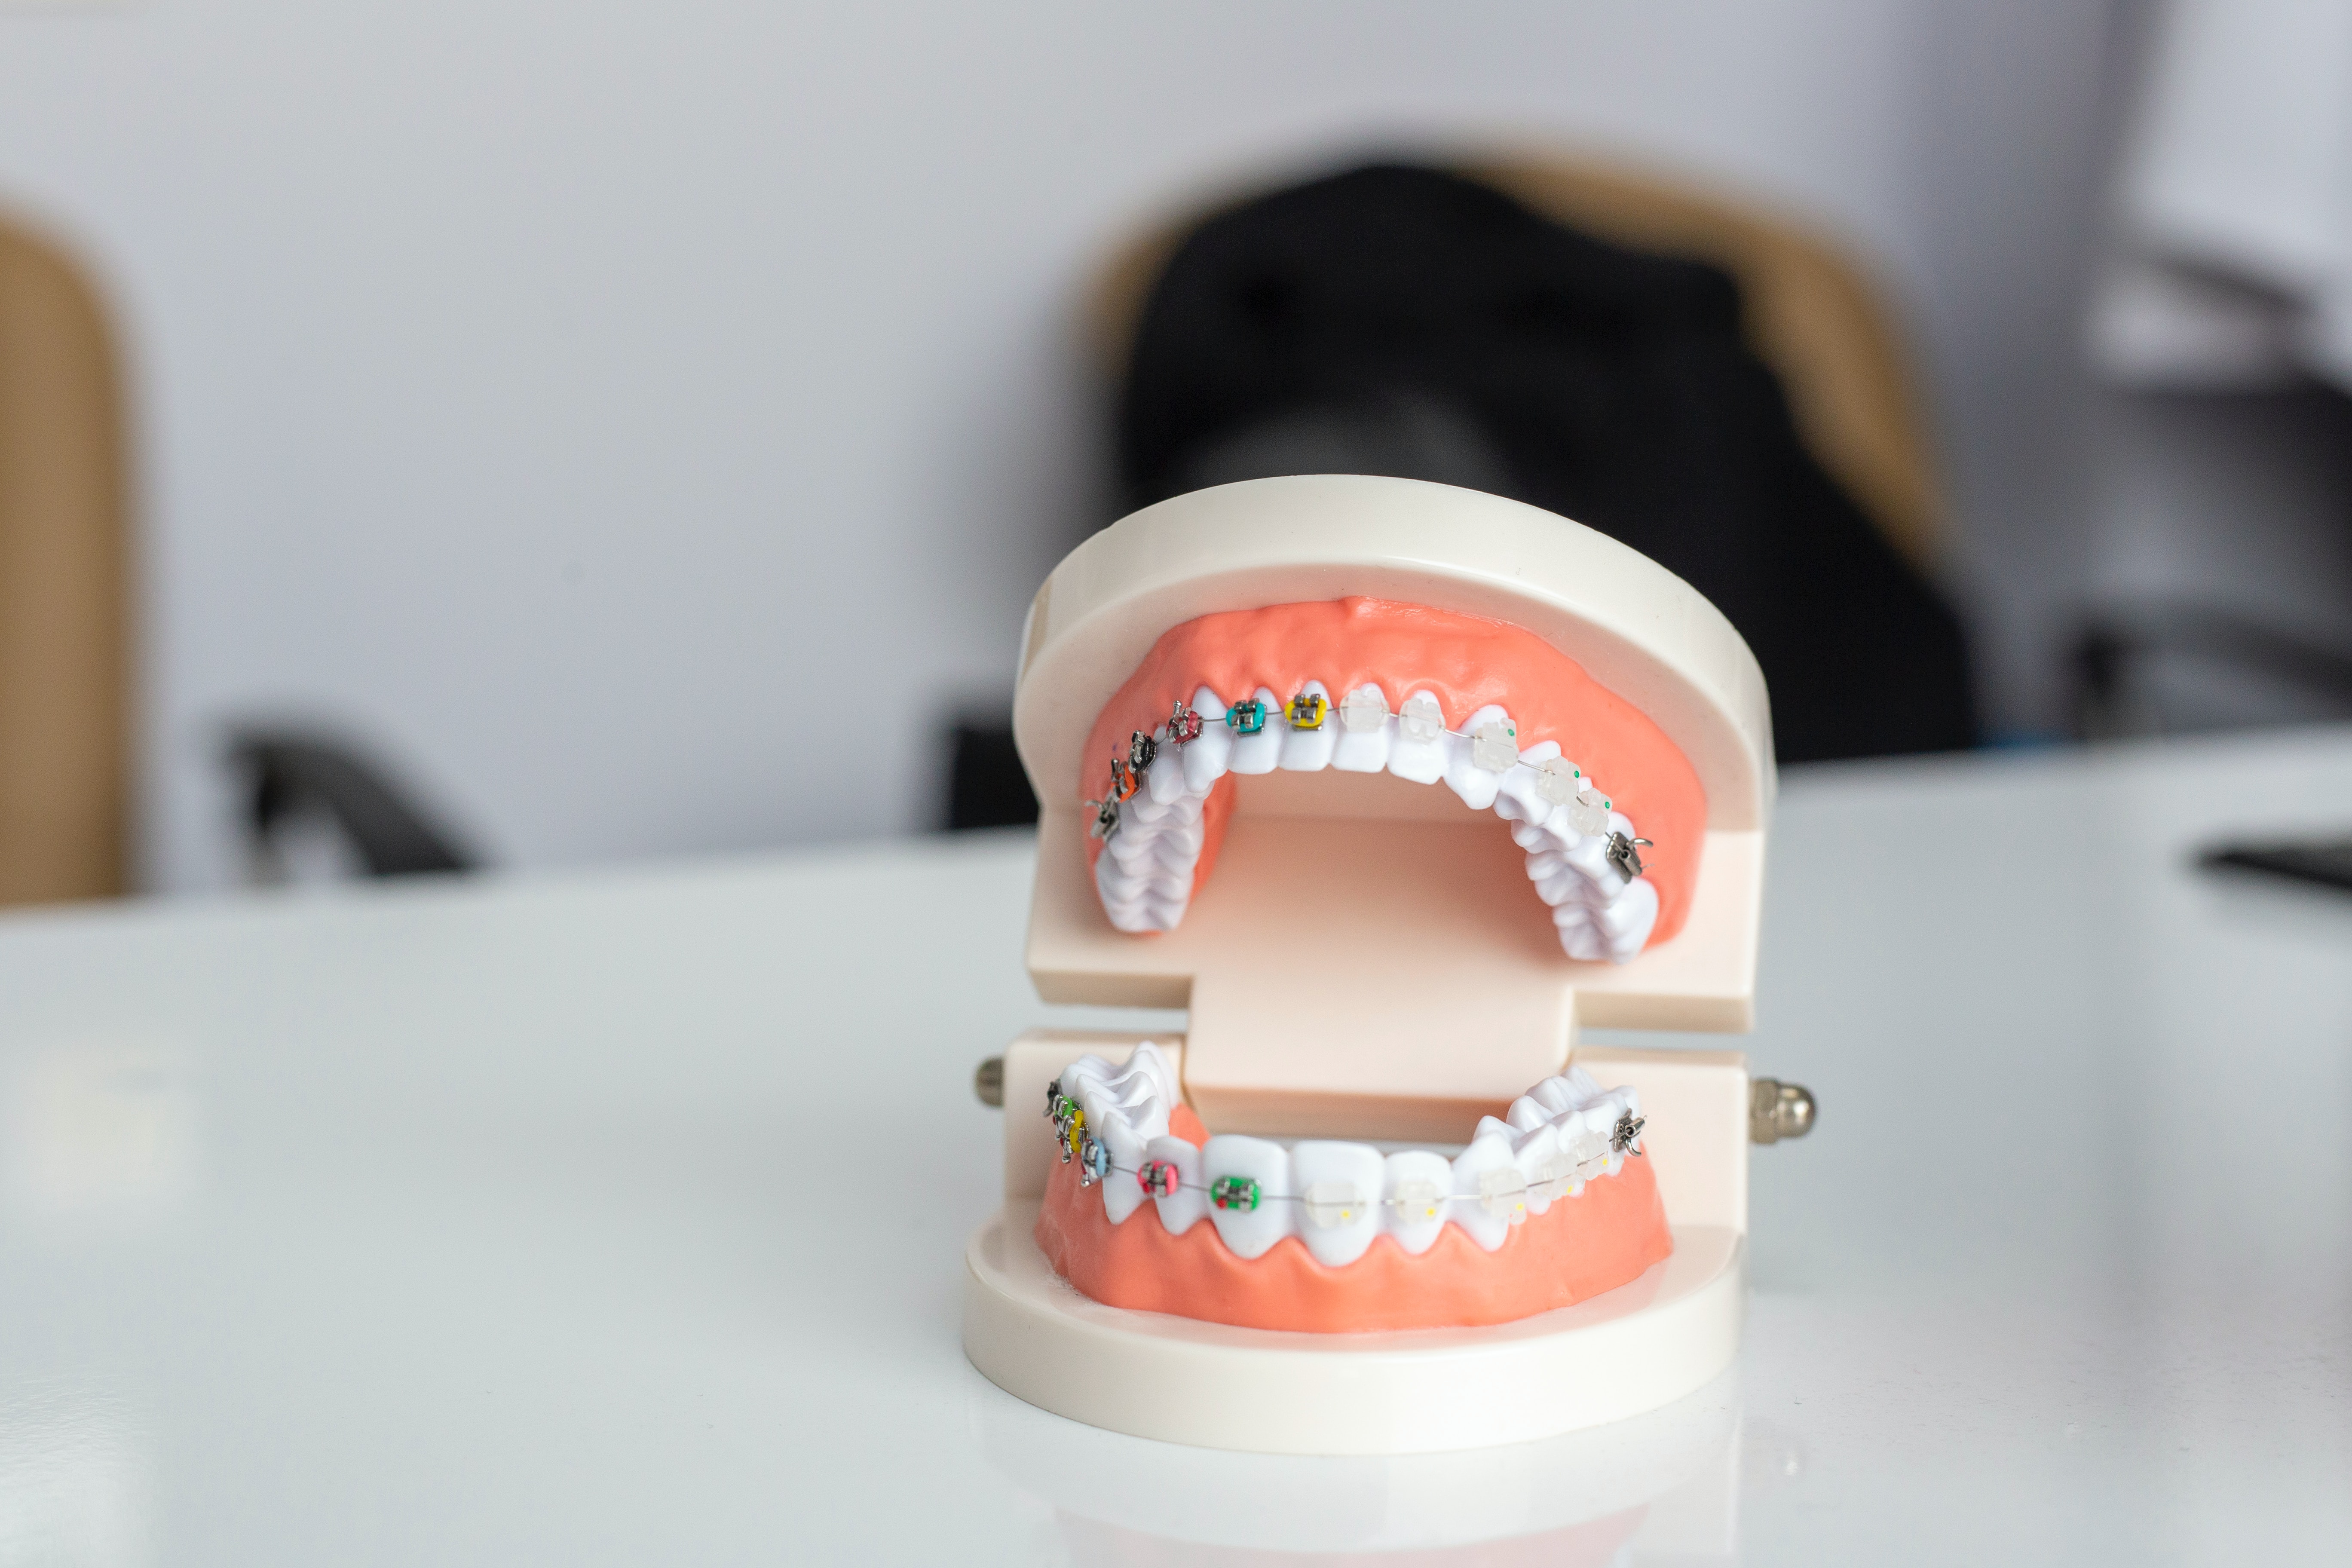 Keep Your Braces Clean With These Tips